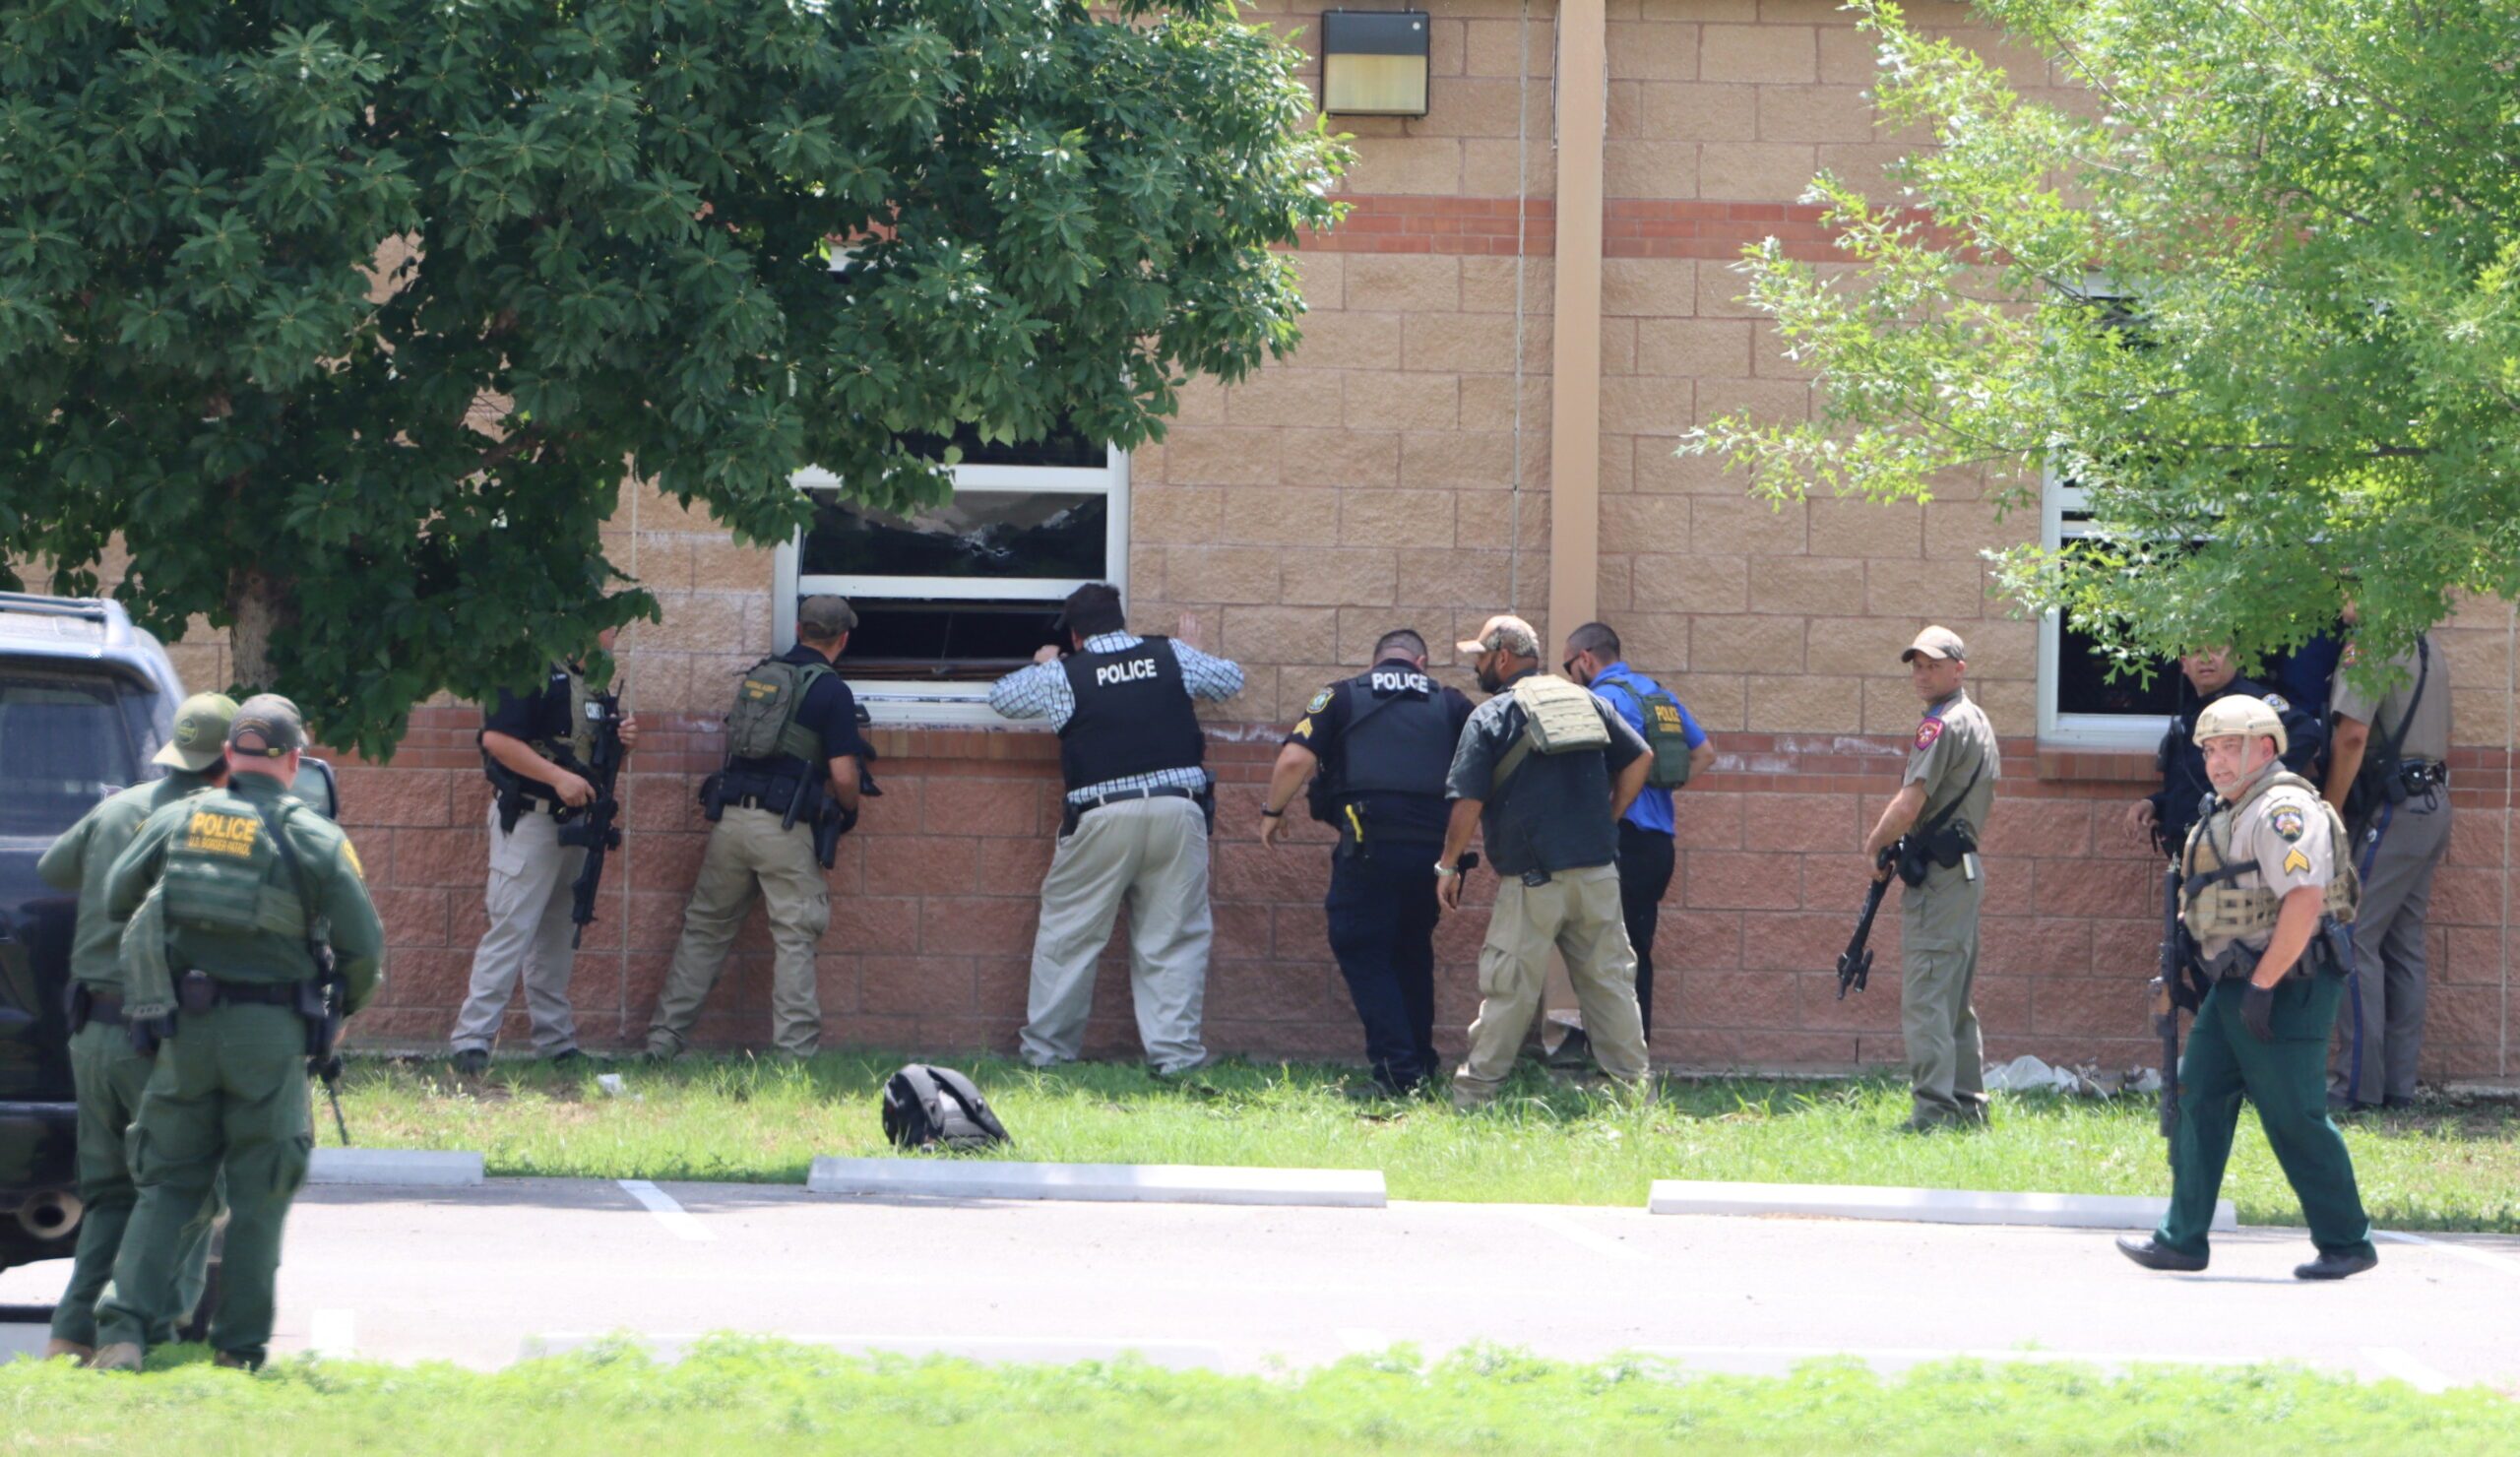 Texas school shooting: Police ‘wrong’ for waiting to storm gunman as students pleaded for help